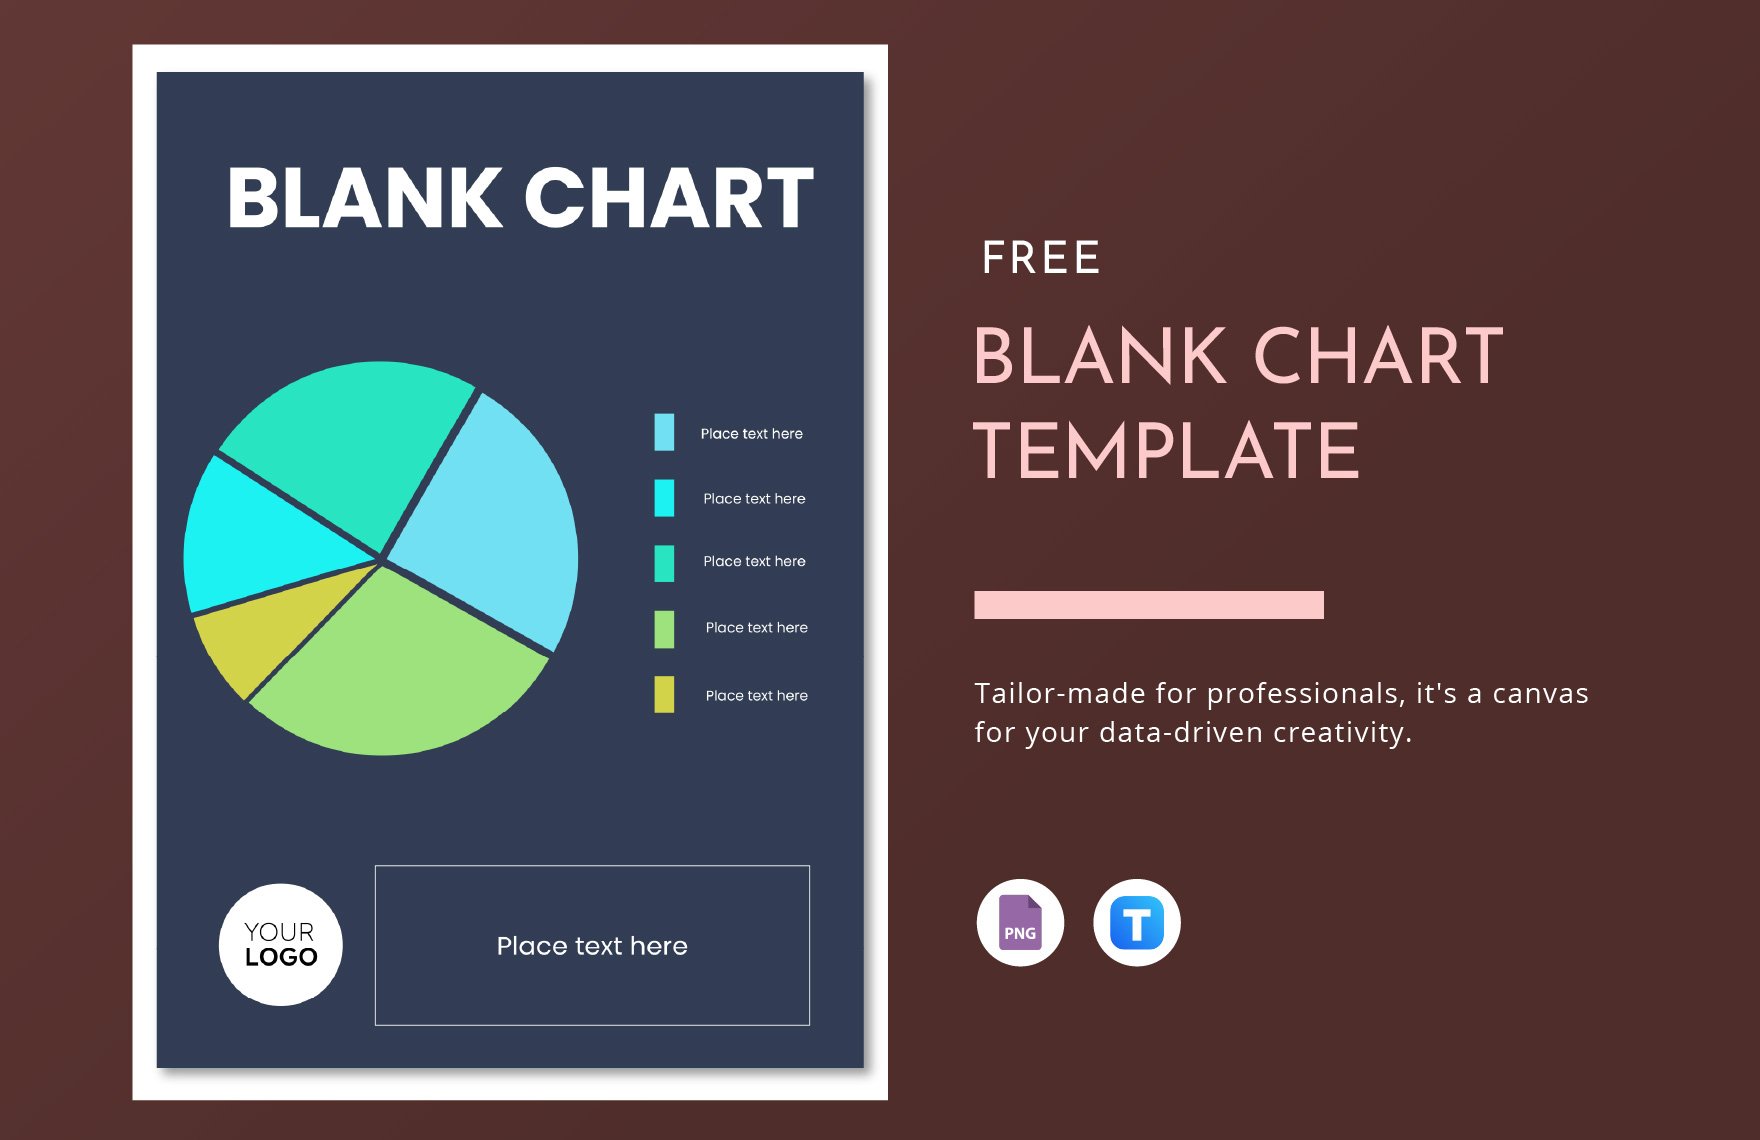 Free Blank Chart Template in PNG